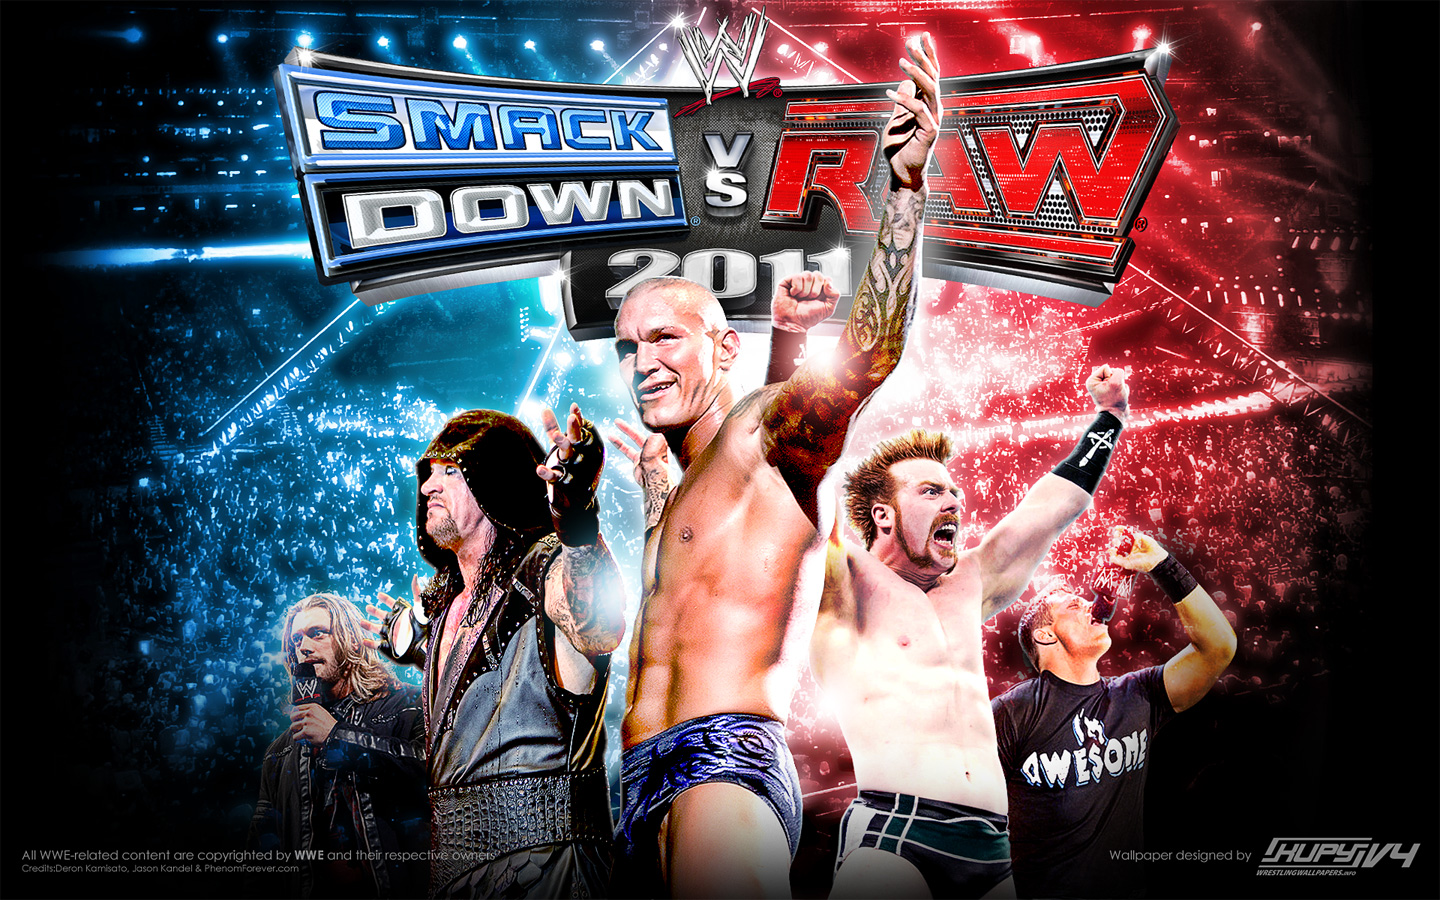 WWE Smackdown VS Raw Pc Game Full Version Free Download 